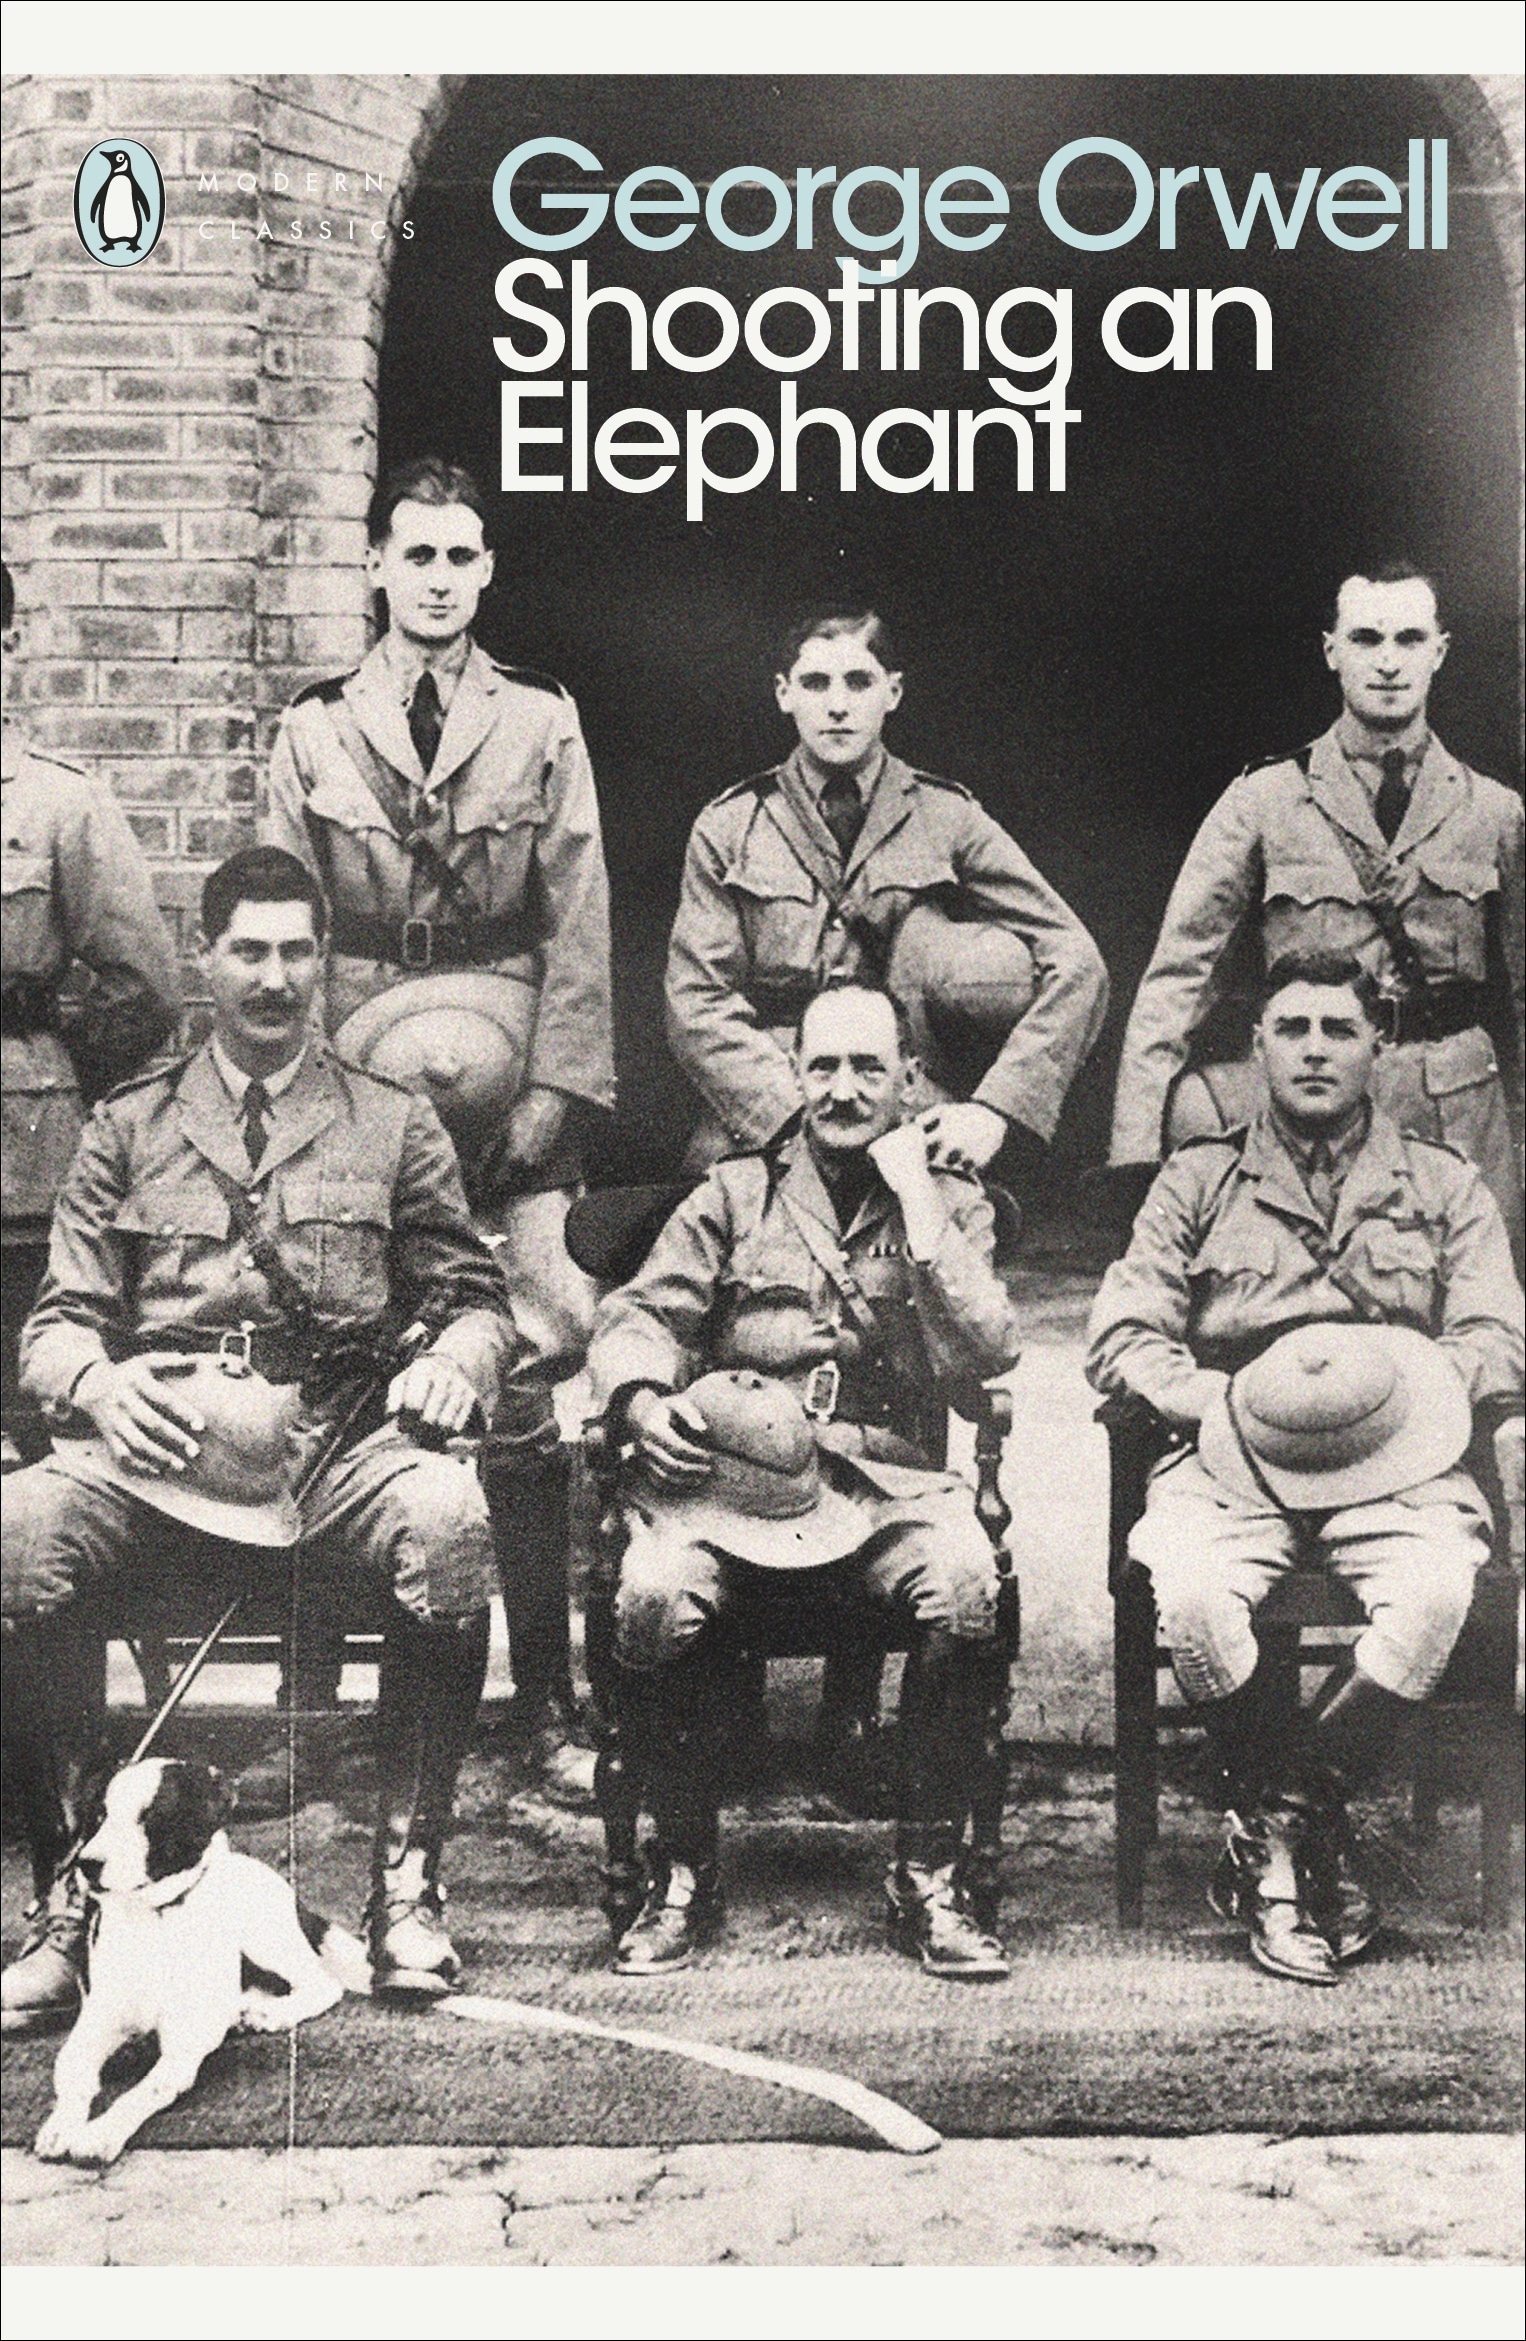 Book “Shooting an Elephant” by George Orwell, Jeremy Paxman — June 5, 2003